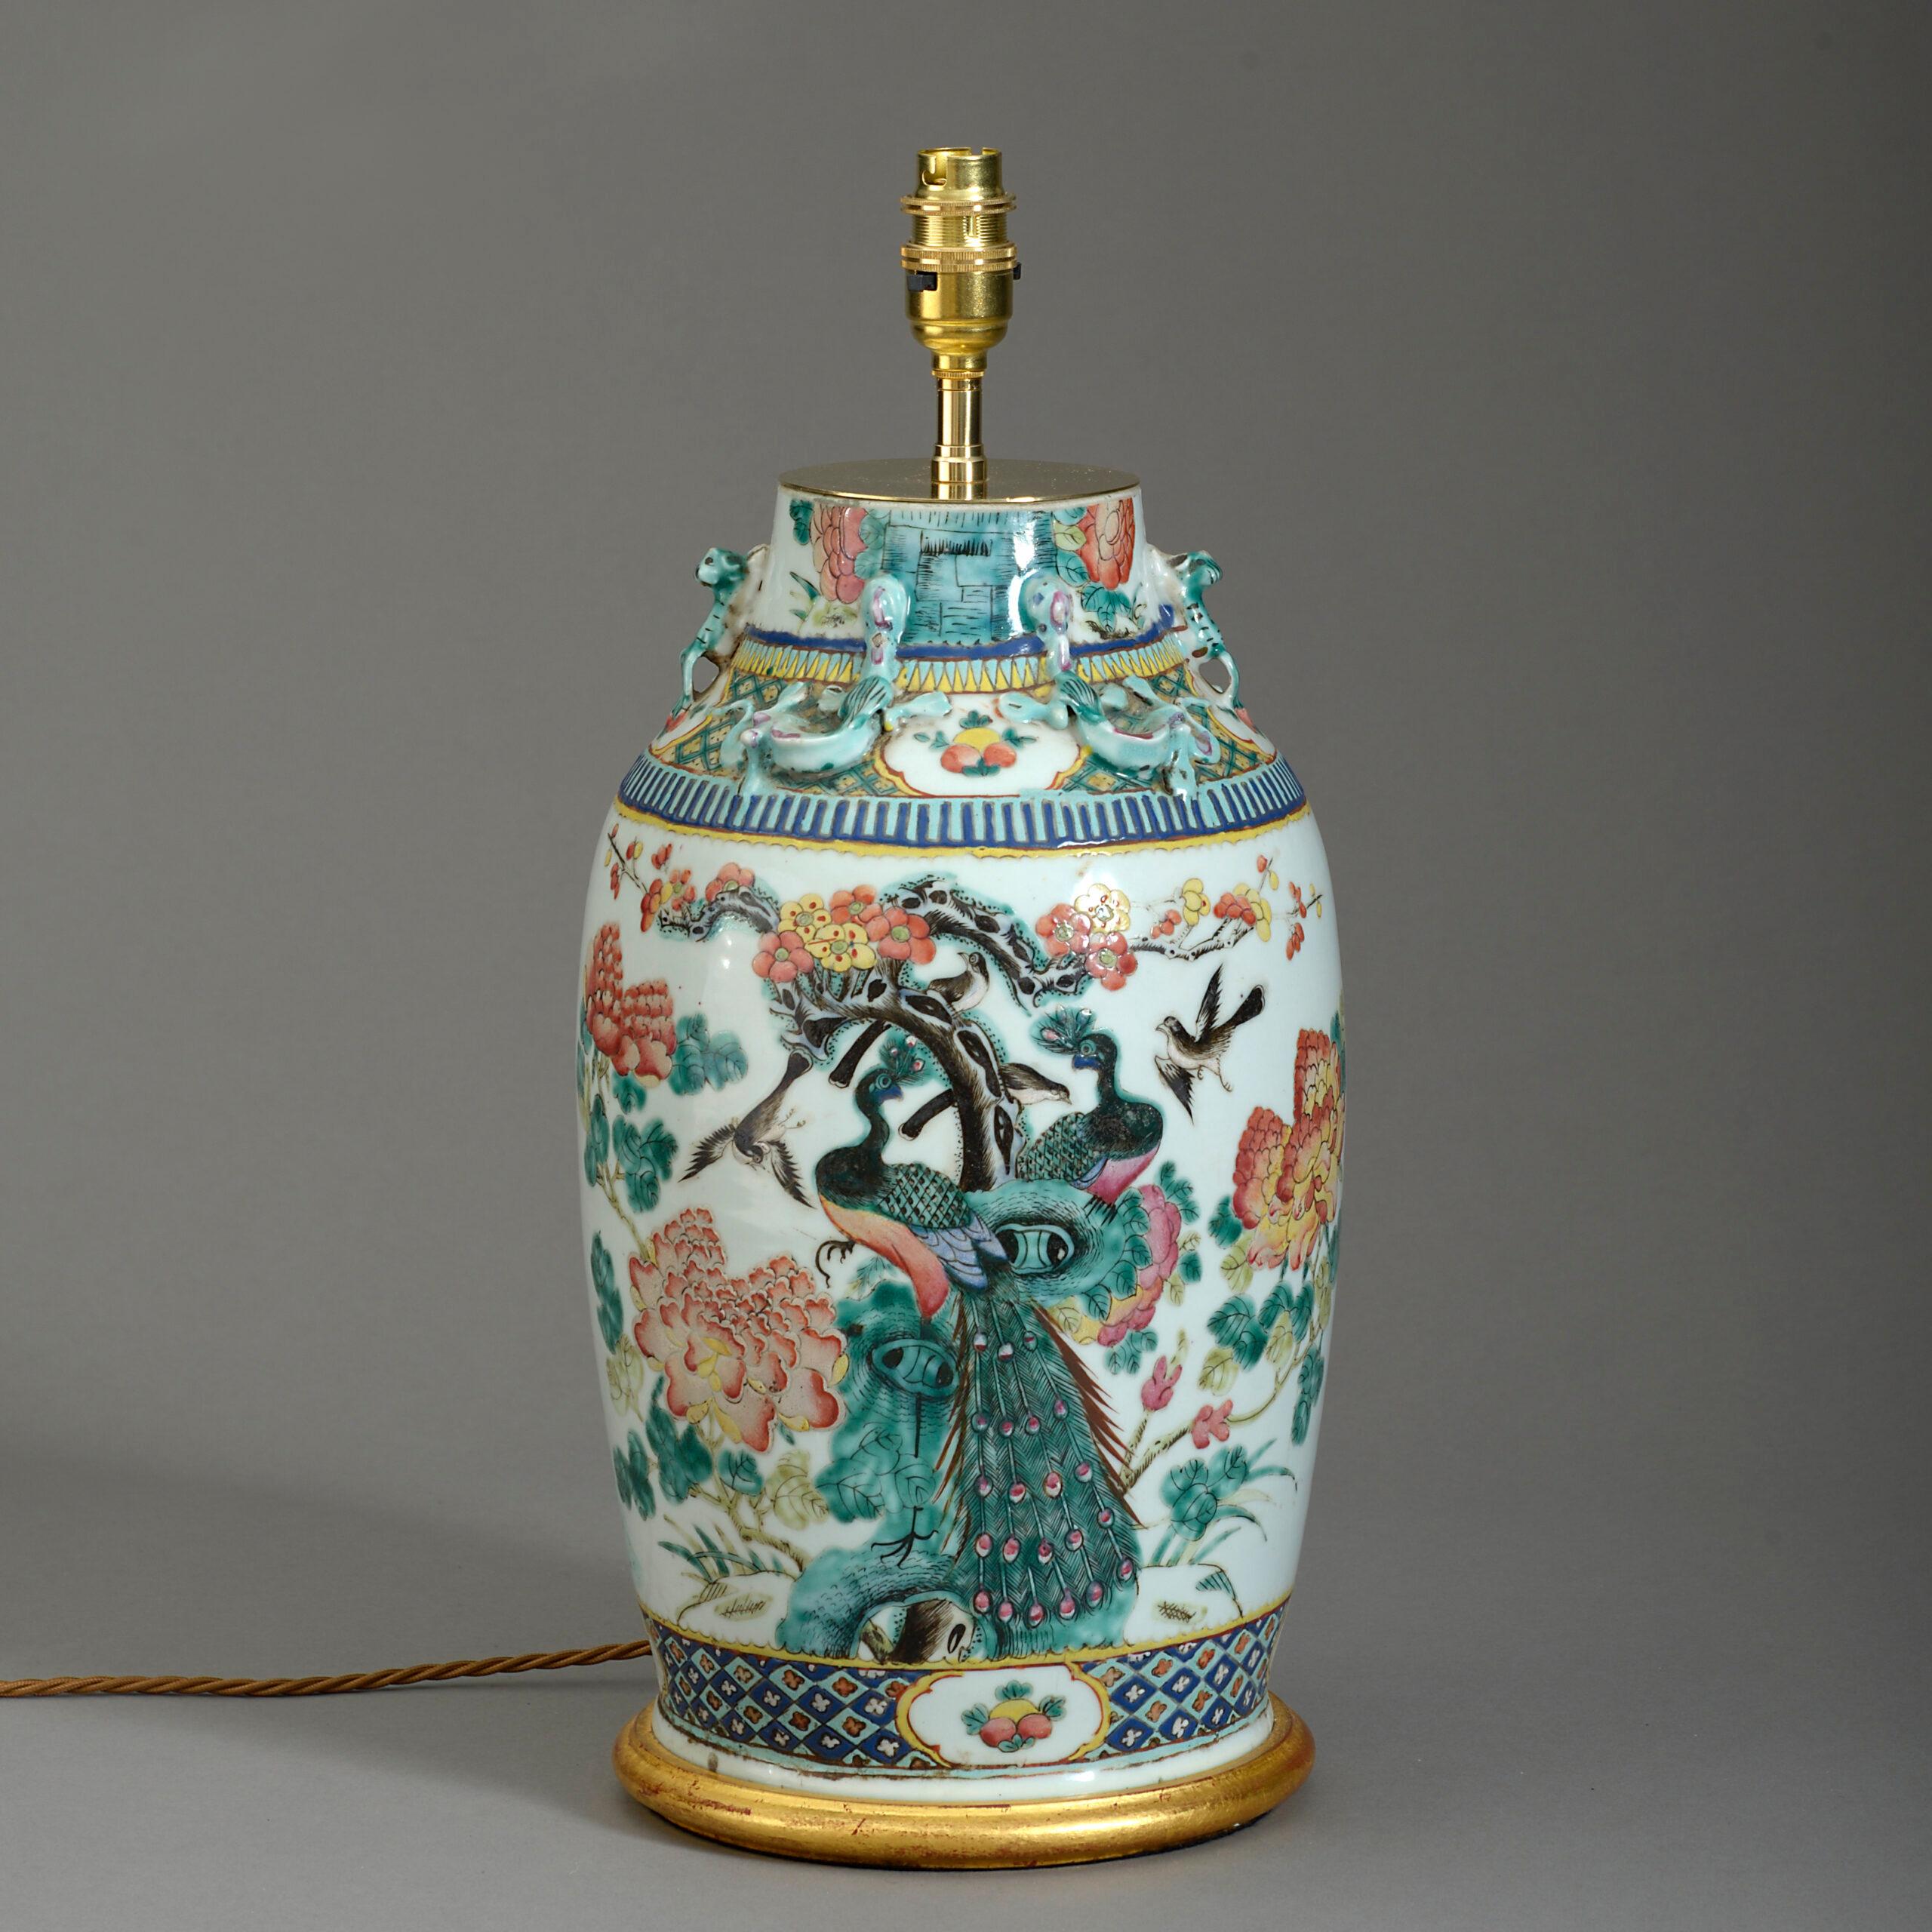 A mid-nineteenth century famille verte porcelain vase of good scale, decorated throughout with exotic birds, flowers and foliage. Now mounted as a lamp base upon a turned giltwood base. The neck reduced in height.

Dimensions refer to vase and